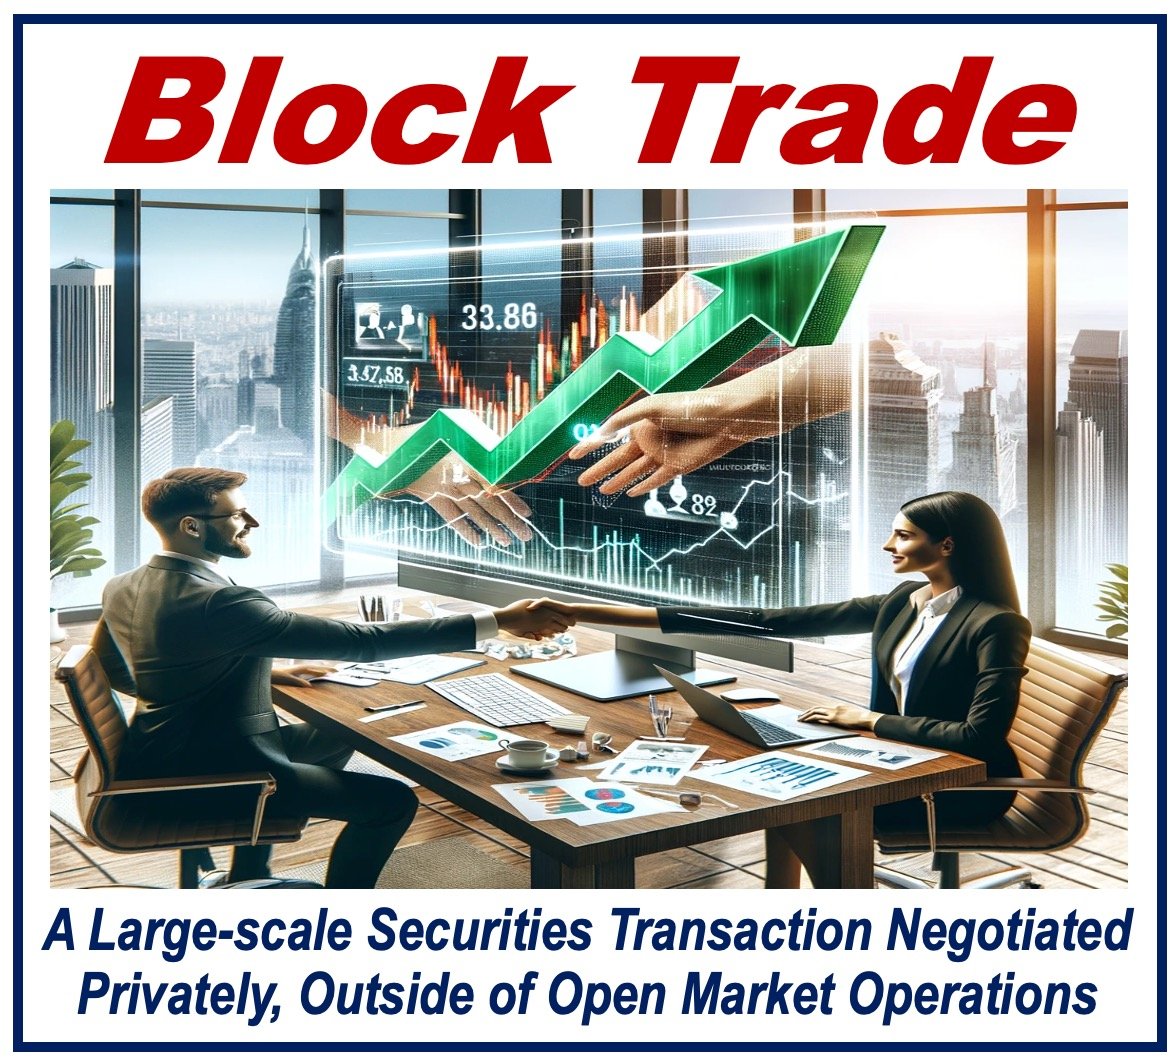 Two traders shaking hands plus a definition of Block Trade